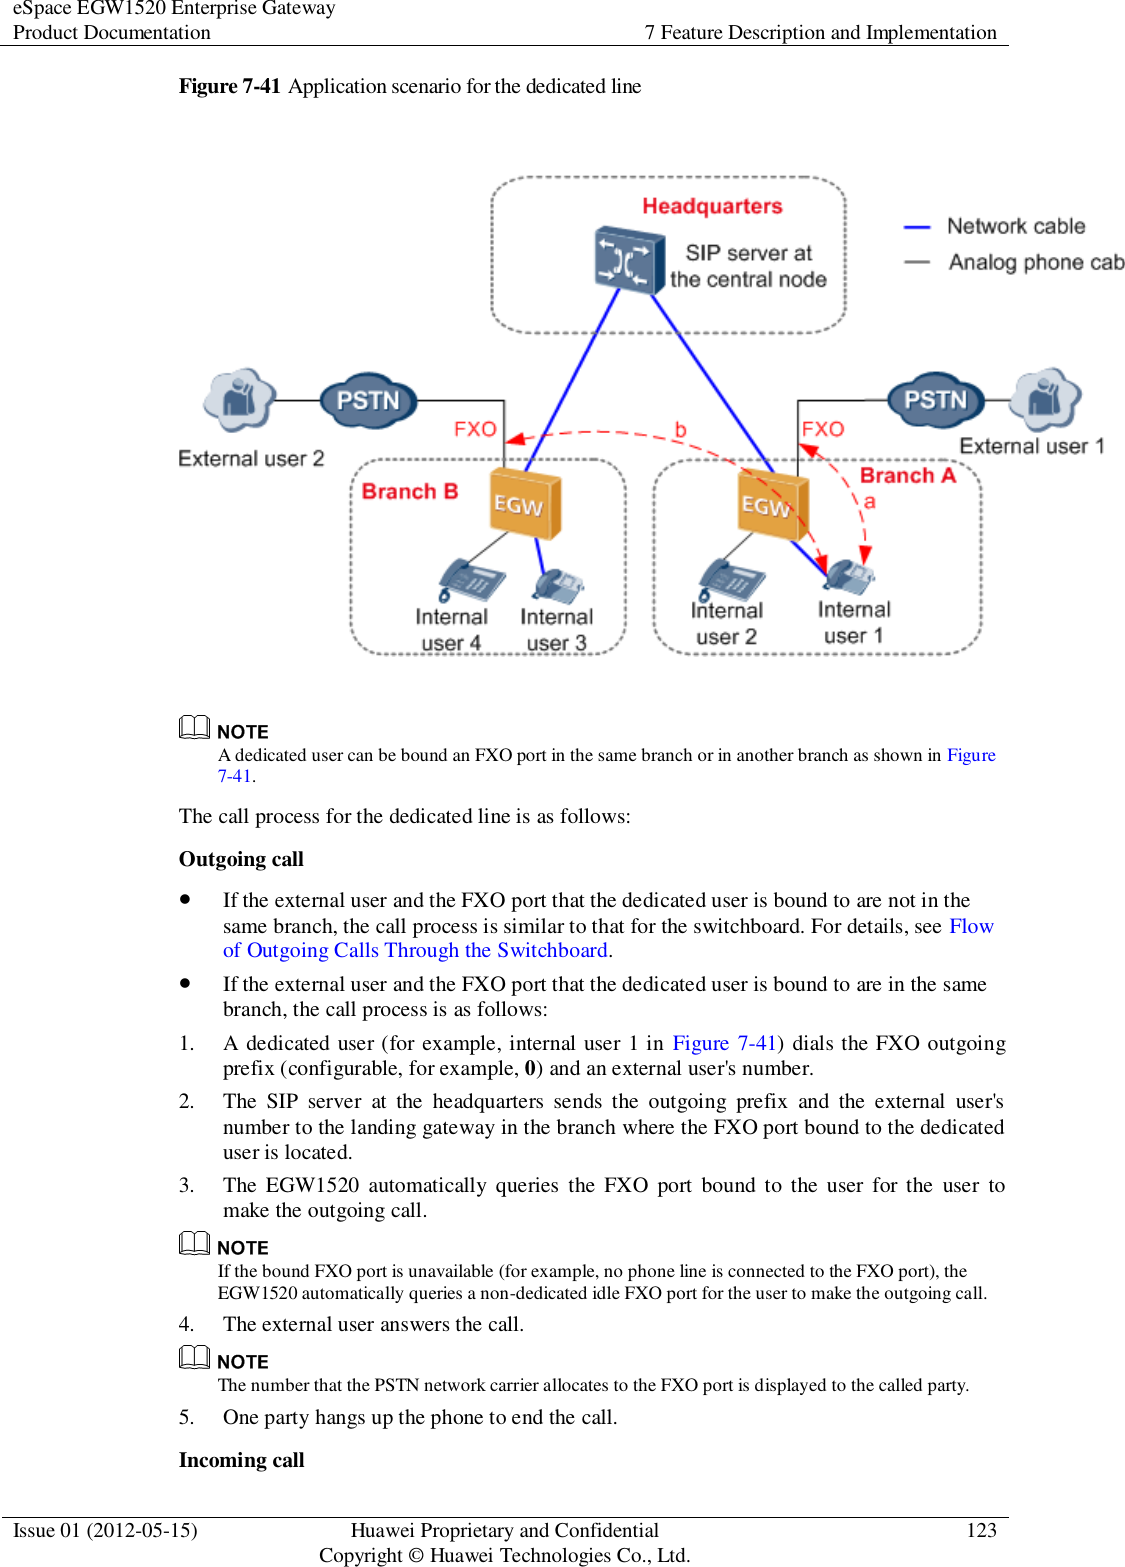 eSpace EGW1520 Enterprise Gateway Product Documentation 7 Feature Description and Implementation  Issue 01 (2012-05-15) Huawei Proprietary and Confidential                                     Copyright © Huawei Technologies Co., Ltd. 123  Figure 7-41 Application scenario for the dedicated line    A dedicated user can be bound an FXO port in the same branch or in another branch as shown in Figure 7-41. The call process for the dedicated line is as follows: Outgoing call  If the external user and the FXO port that the dedicated user is bound to are not in the same branch, the call process is similar to that for the switchboard. For details, see Flow of Outgoing Calls Through the Switchboard.  If the external user and the FXO port that the dedicated user is bound to are in the same branch, the call process is as follows: 1. A dedicated user (for example, internal user 1 in Figure 7-41) dials the FXO outgoing prefix (configurable, for example, 0) and an external user&apos;s number. 2. The  SIP  server  at  the  headquarters  sends  the  outgoing  prefix  and  the  external  user&apos;s number to the landing gateway in the branch where the FXO port bound to the dedicated user is located. 3. The  EGW1520  automatically  queries  the  FXO  port  bound  to the user  for  the  user  to make the outgoing call.  If the bound FXO port is unavailable (for example, no phone line is connected to the FXO port), the EGW1520 automatically queries a non-dedicated idle FXO port for the user to make the outgoing call. 4. The external user answers the call.  The number that the PSTN network carrier allocates to the FXO port is displayed to the called party. 5. One party hangs up the phone to end the call. Incoming call 